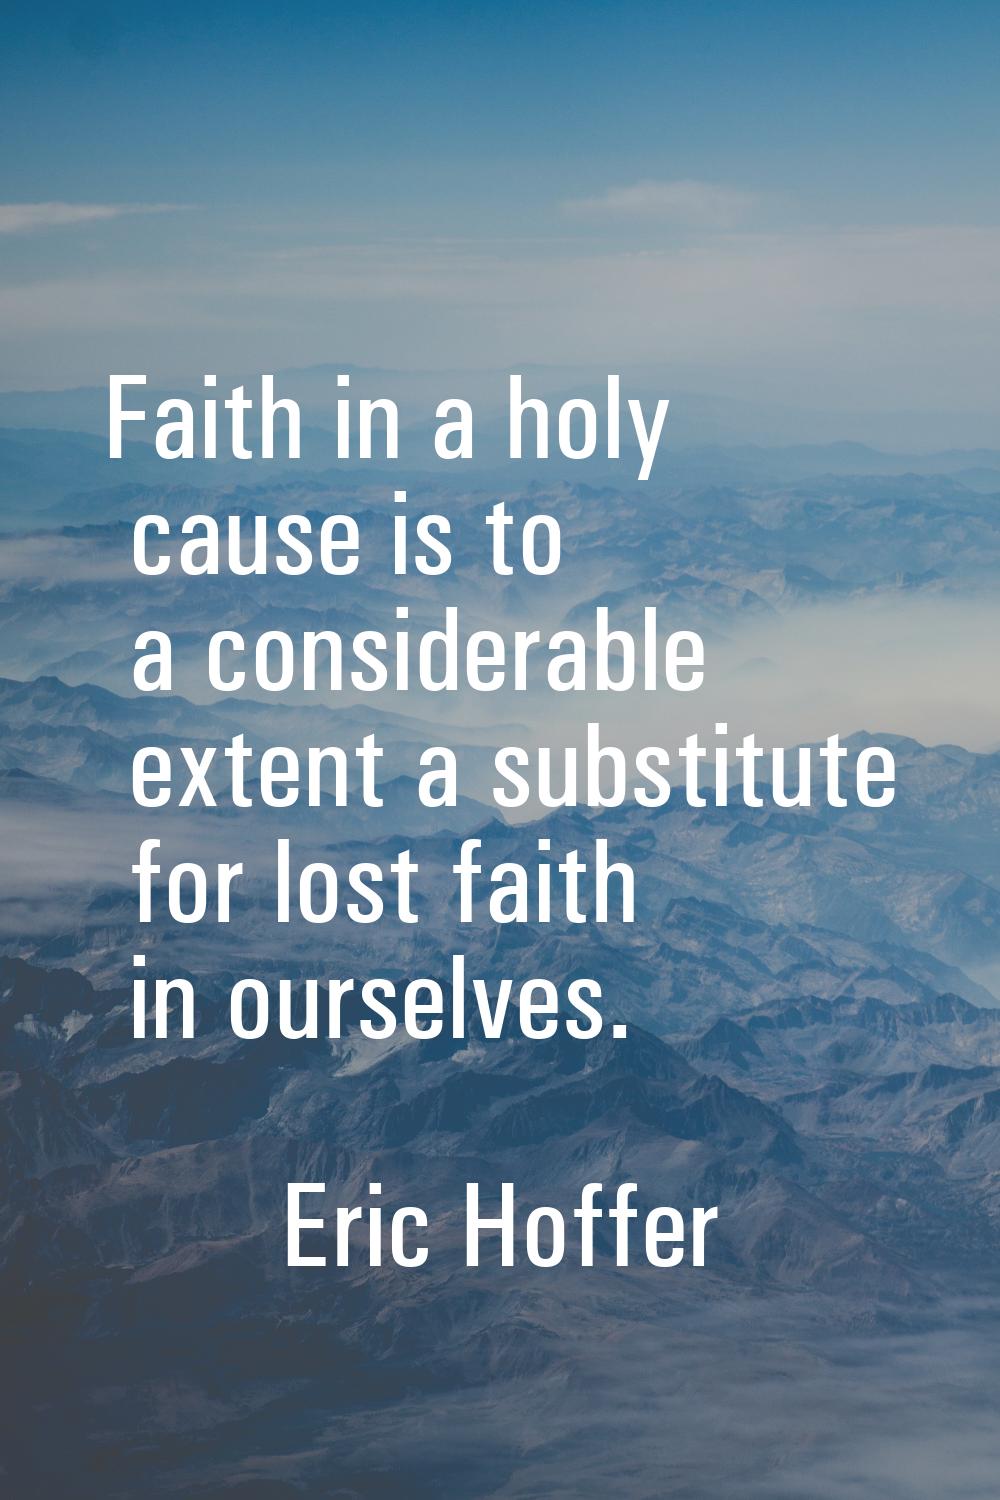 Faith in a holy cause is to a considerable extent a substitute for lost faith in ourselves.